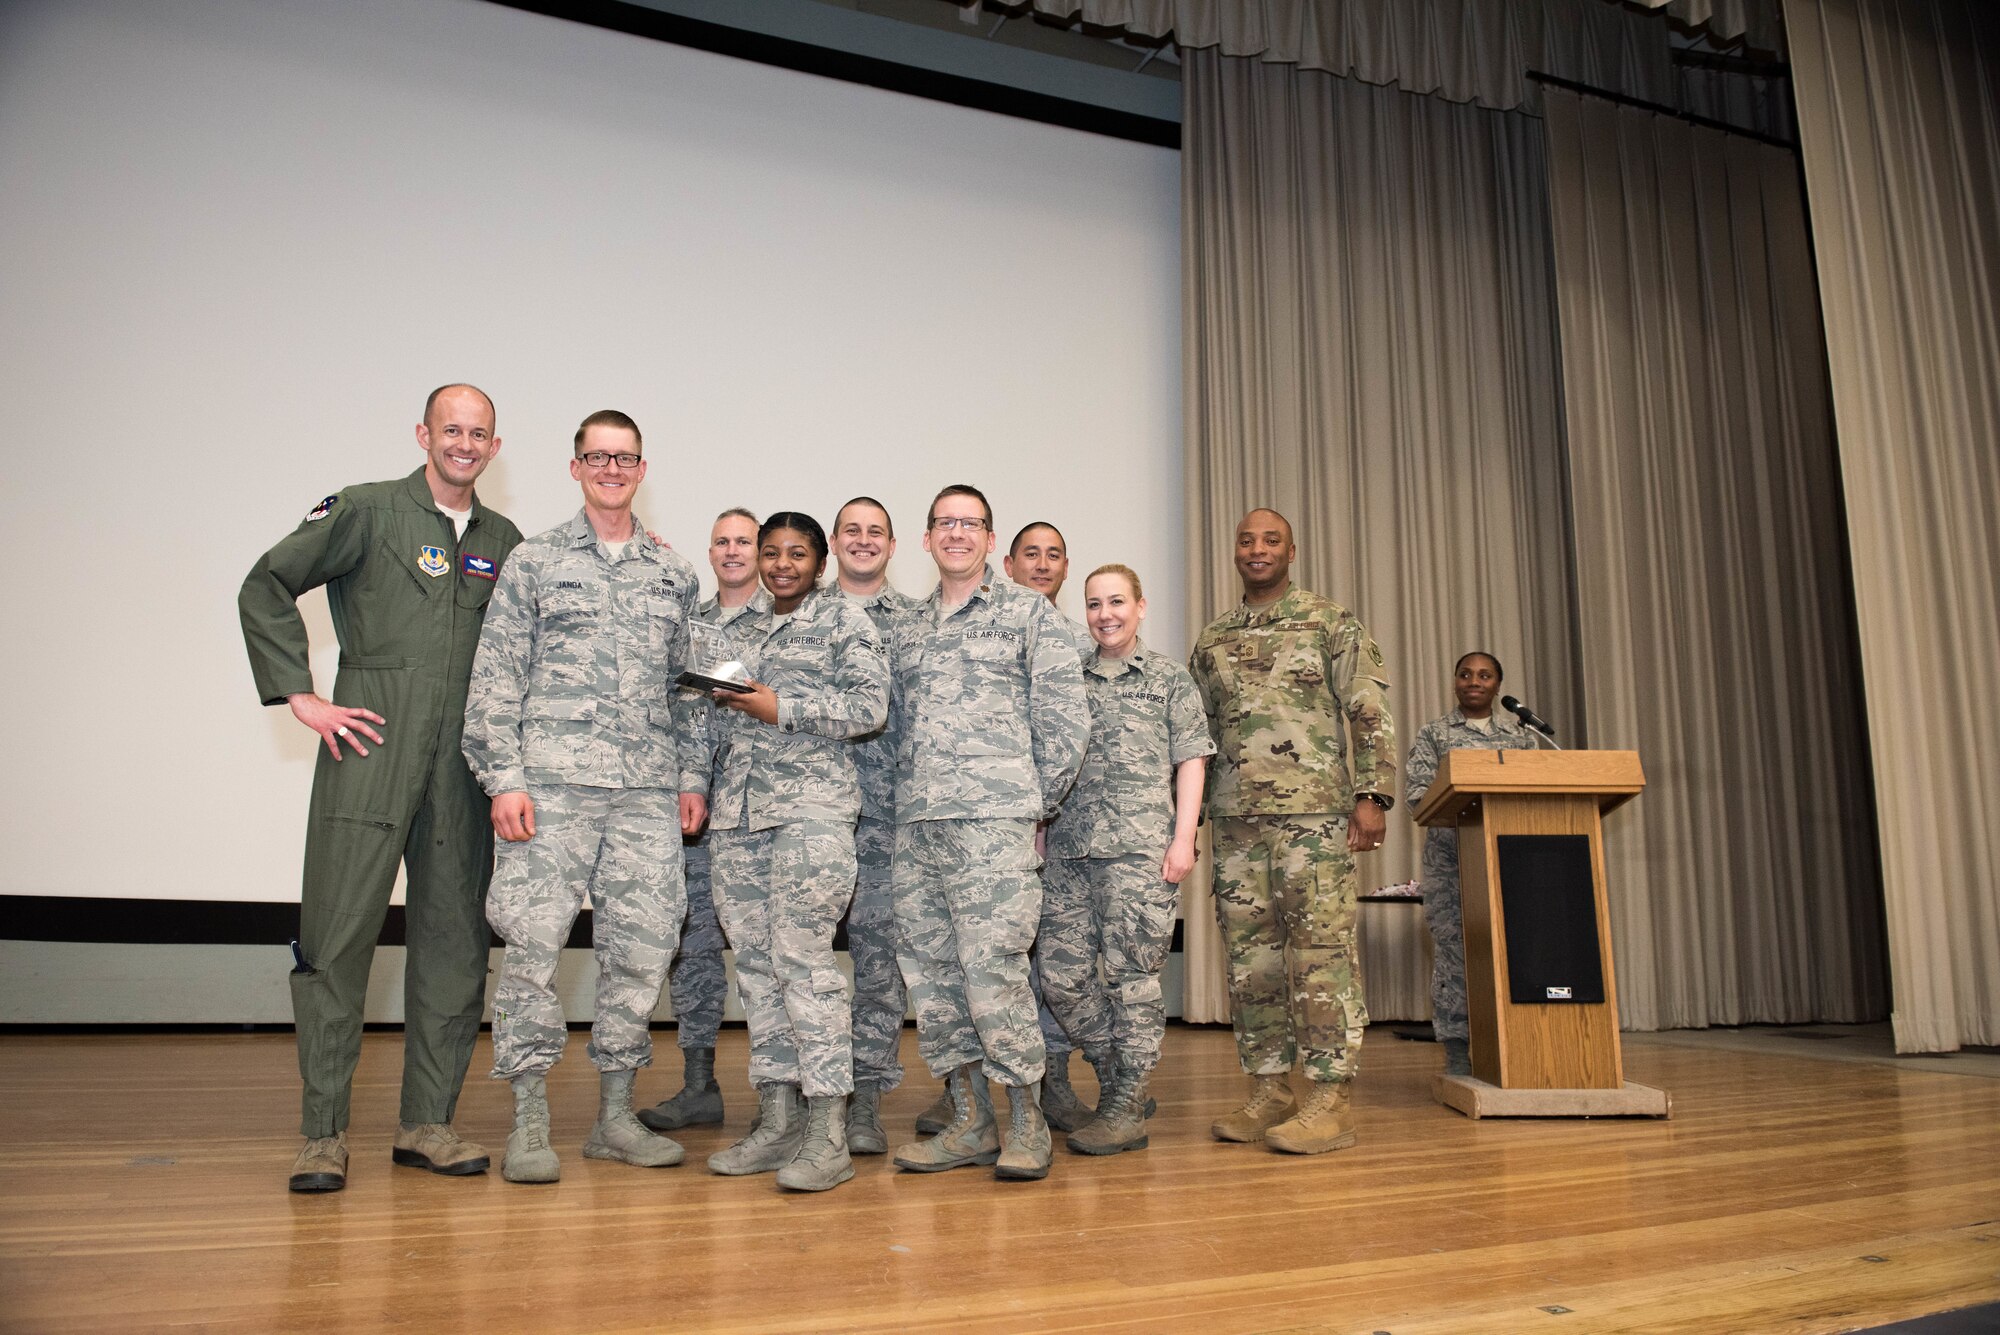 Brig. Gen. E. John Teicert, 412th Test Wing commander (left), poses for a photo with the 412th Medical Group's Family Health Flight and Chief Master Sgt. Roosevelt Jones, 412th TW command chief (right), at the 2018 412th TW 4th Quarter Awards Ceremony held in the base theater Jan. 31, 2019. (U.S. Air Force photo by Joe Jones)